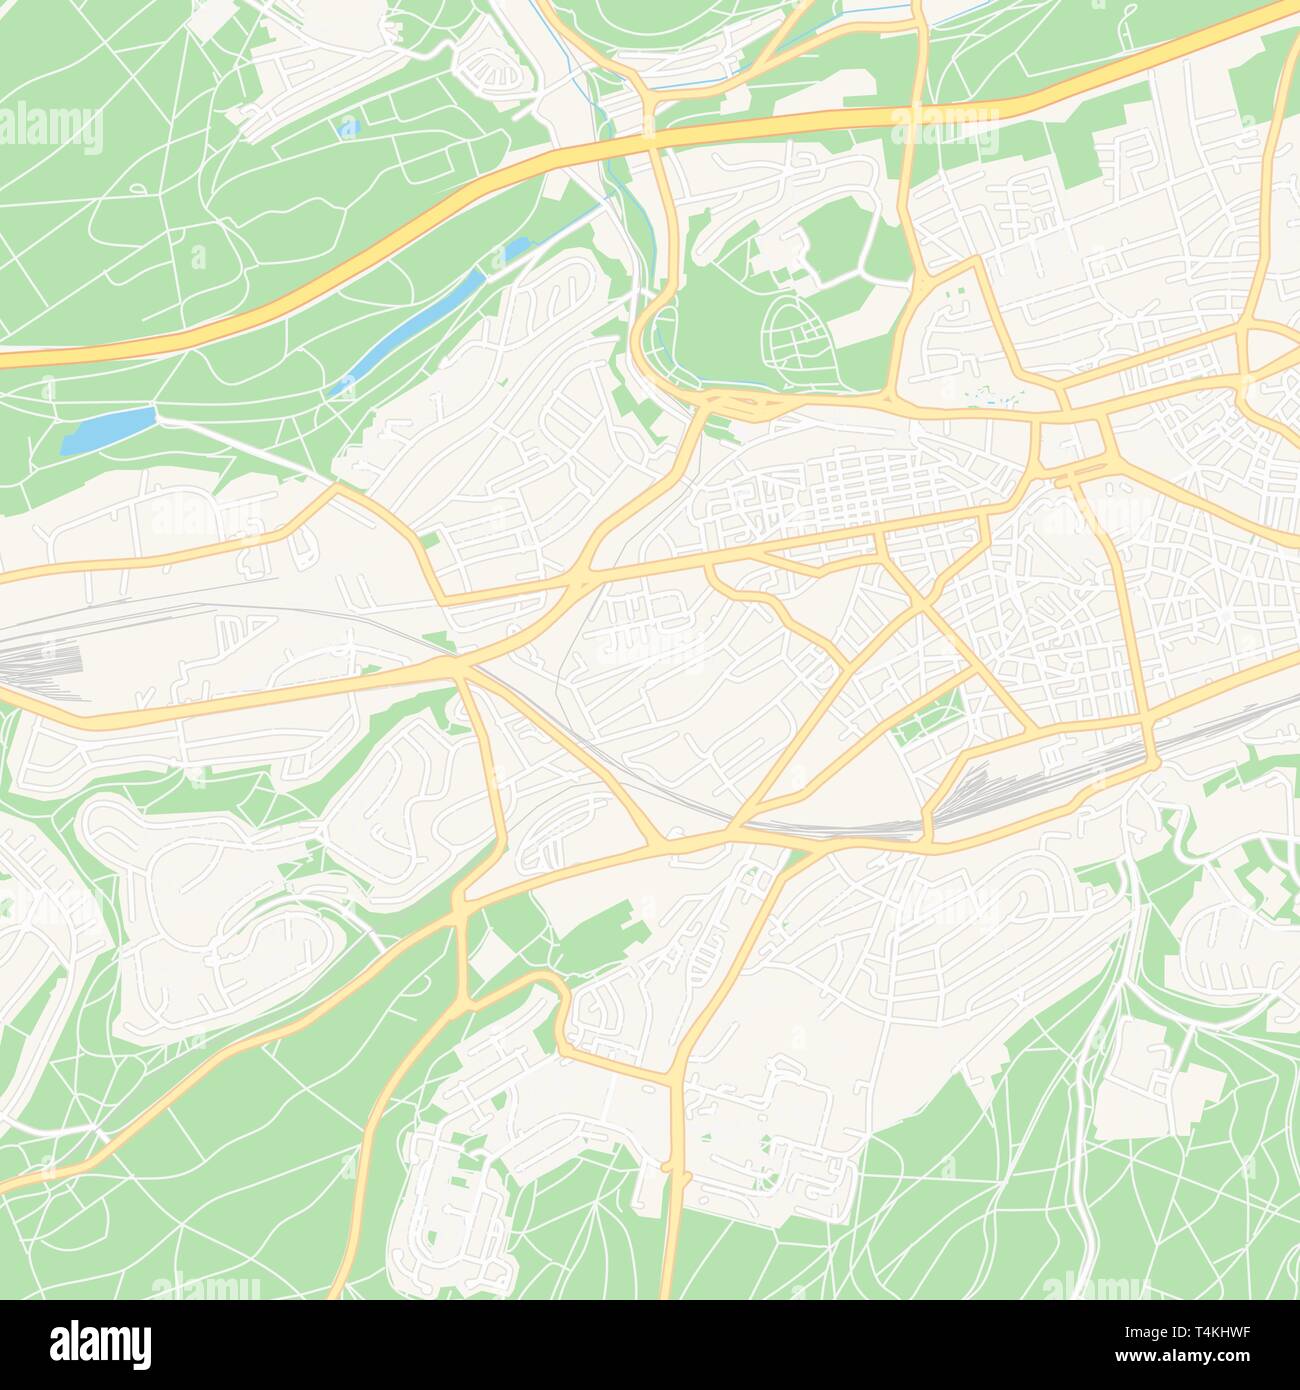 Printable map of Kaiserslautern, Germany with main and secondary roads and larger railways. This map is carefully designed for routing and placing ind Stock Vector